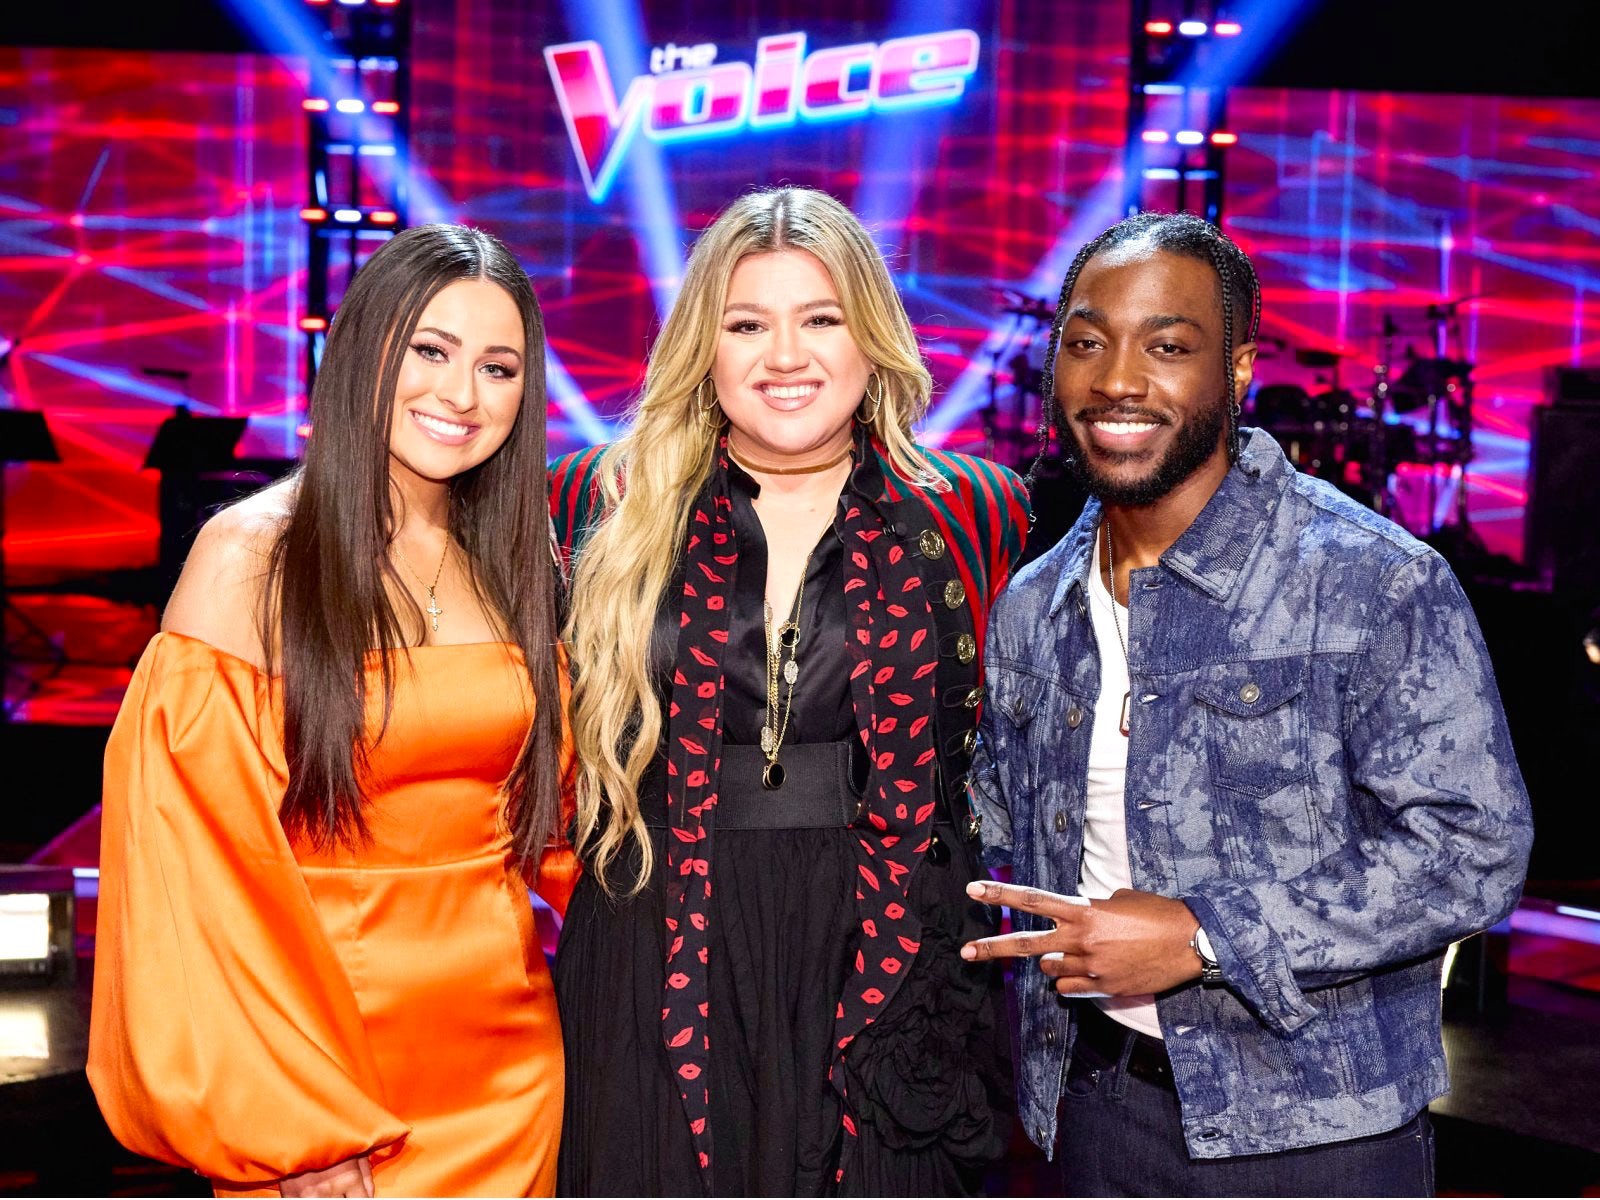 'The Voice' coaches Kelly Clarkson and Niall Horan advance Playoffs